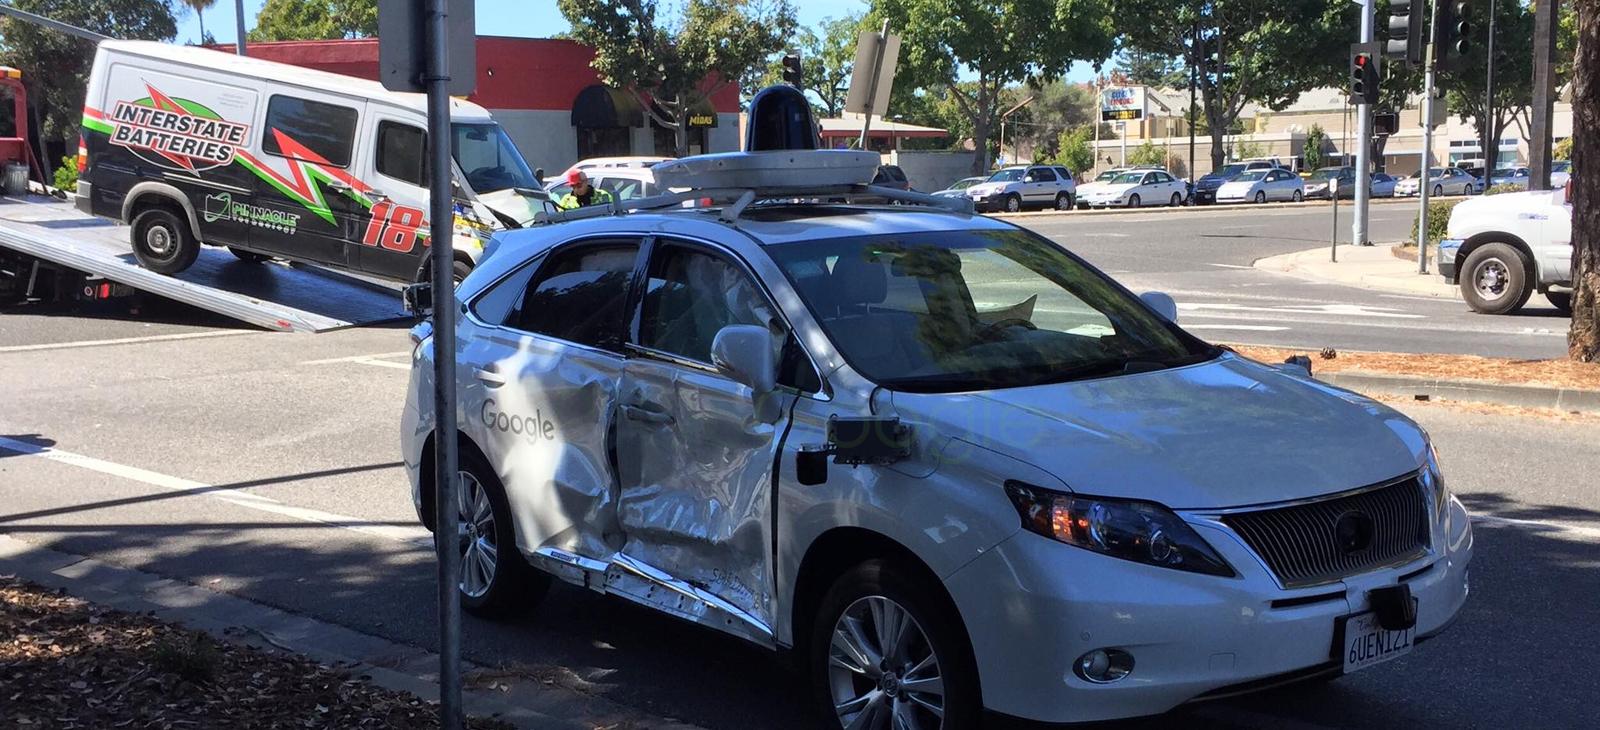 photo of Google's self-driving car is the victim in a serious crash image